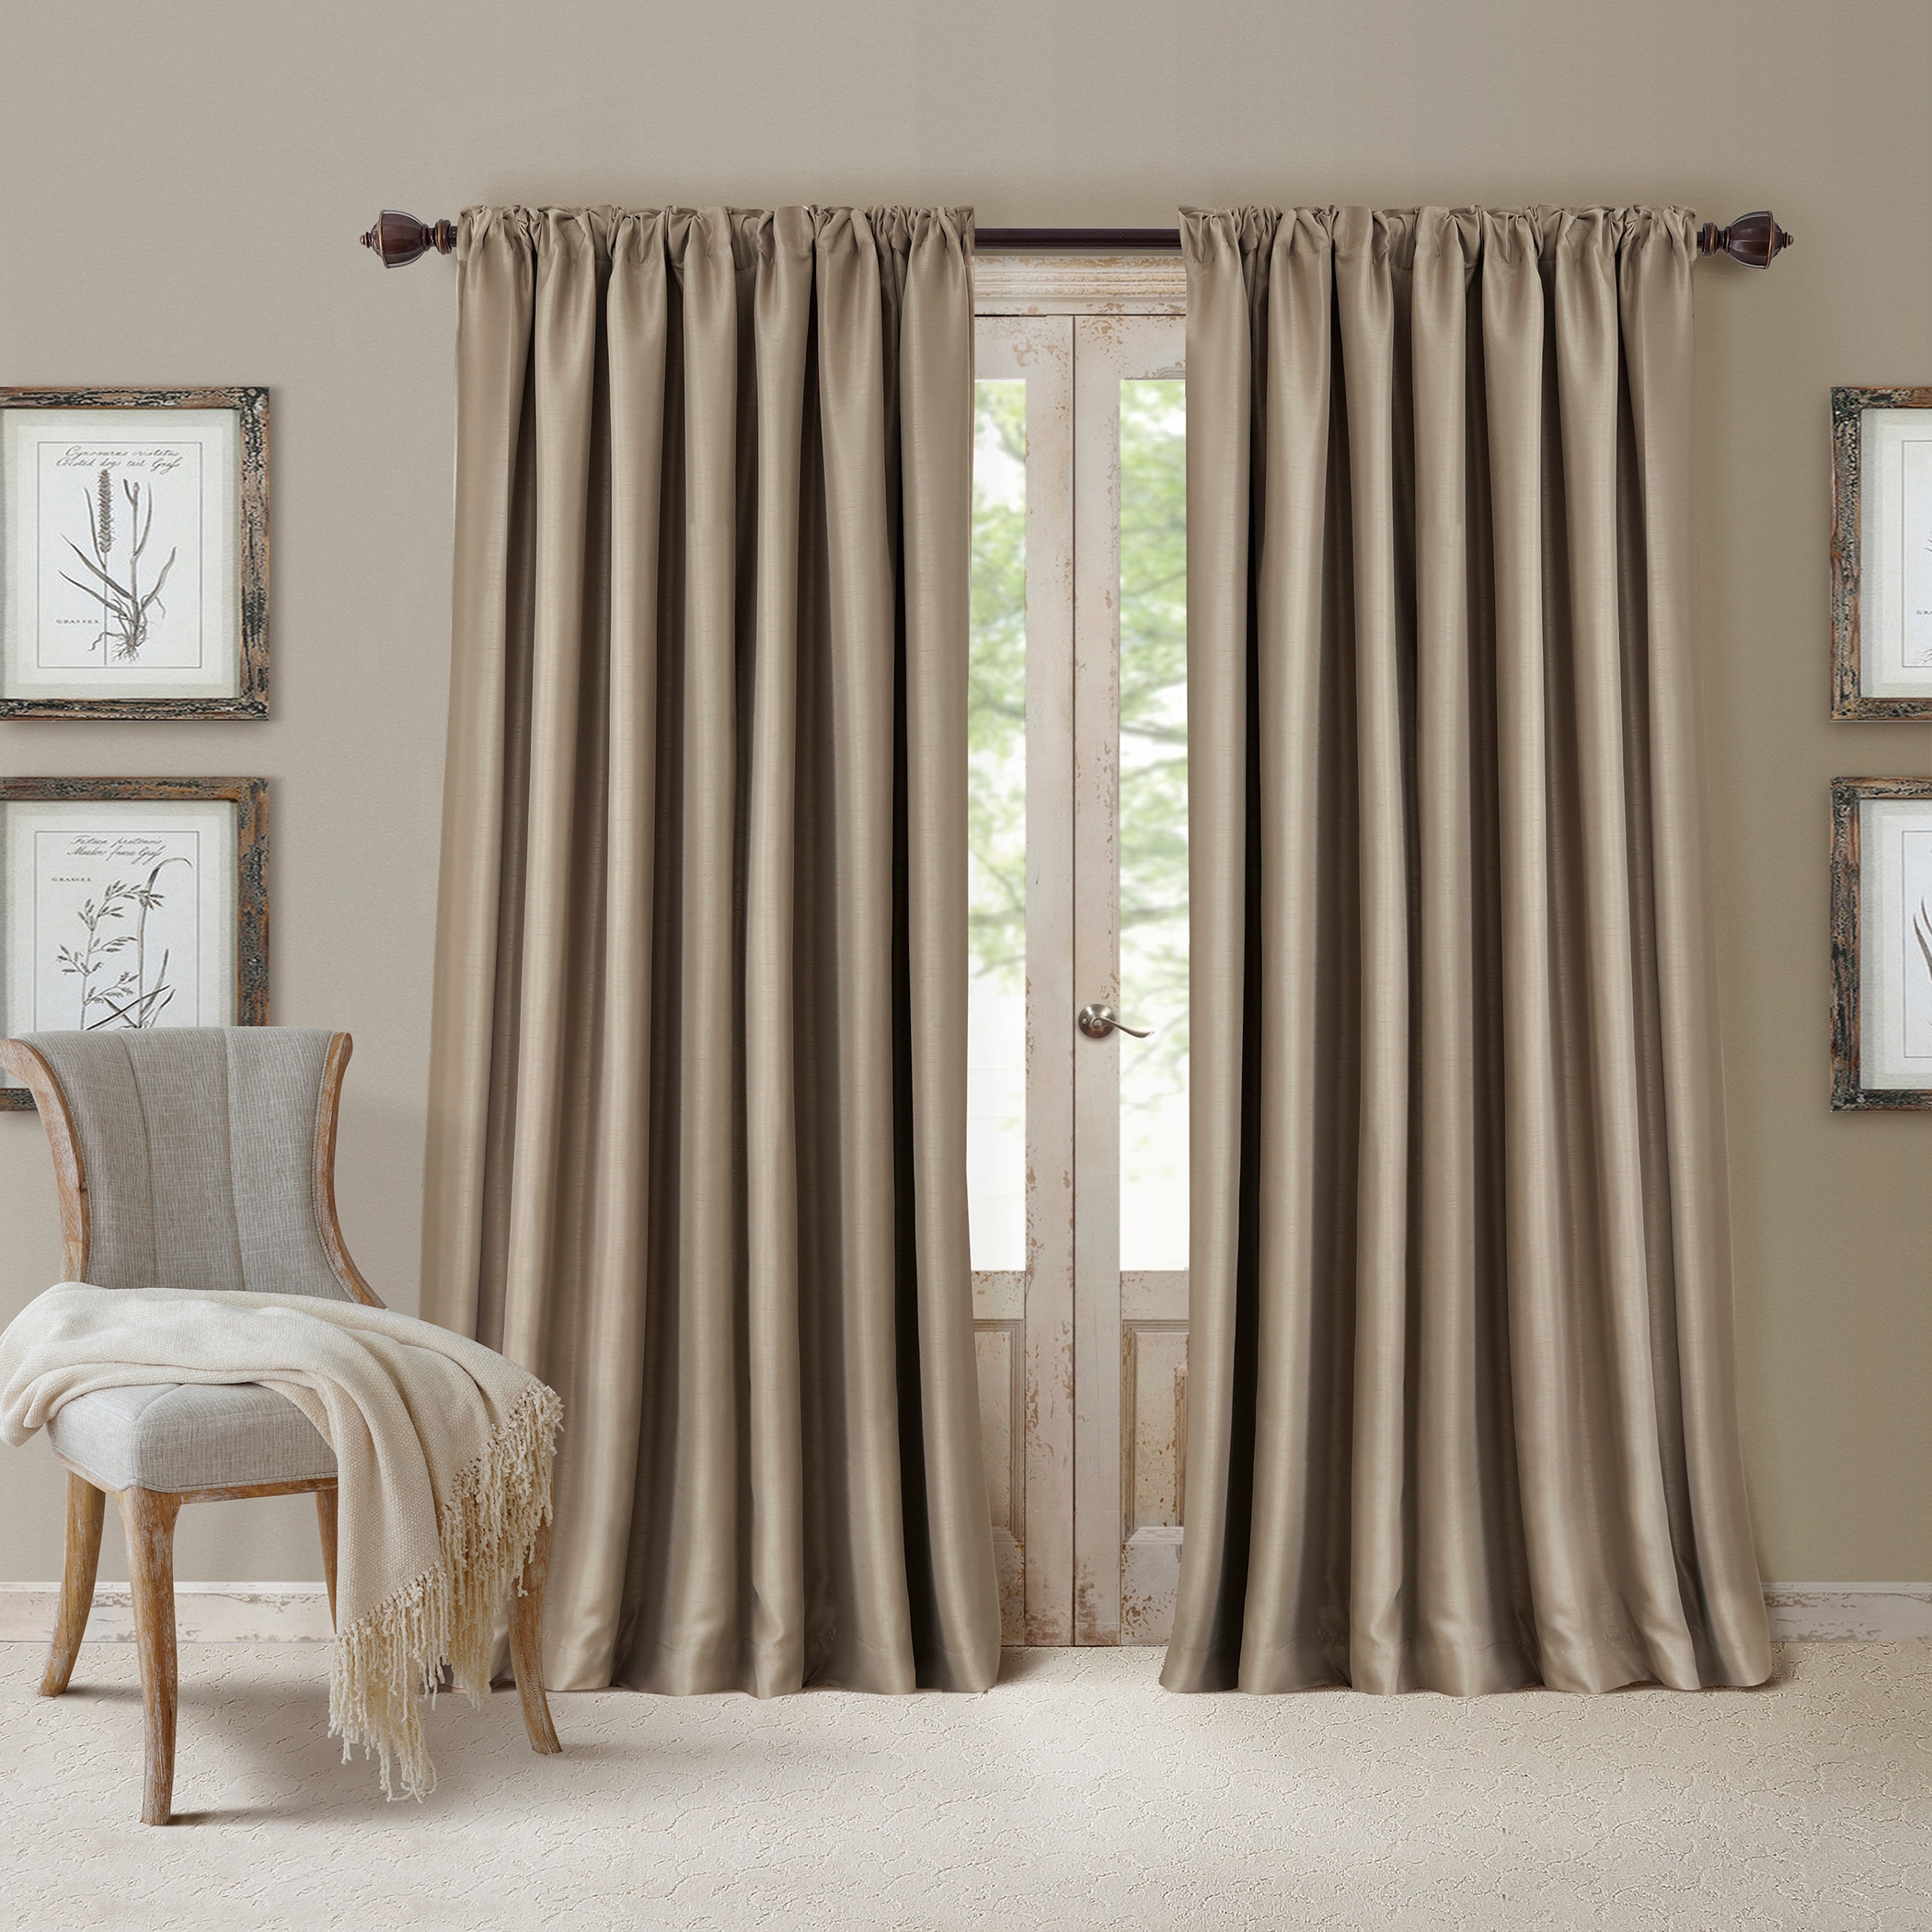 Drapes Home Curtain the department Panel & Blackout in Rod 108-in Pocket Fashions Single Elrene at Interlined Curtains Taupe